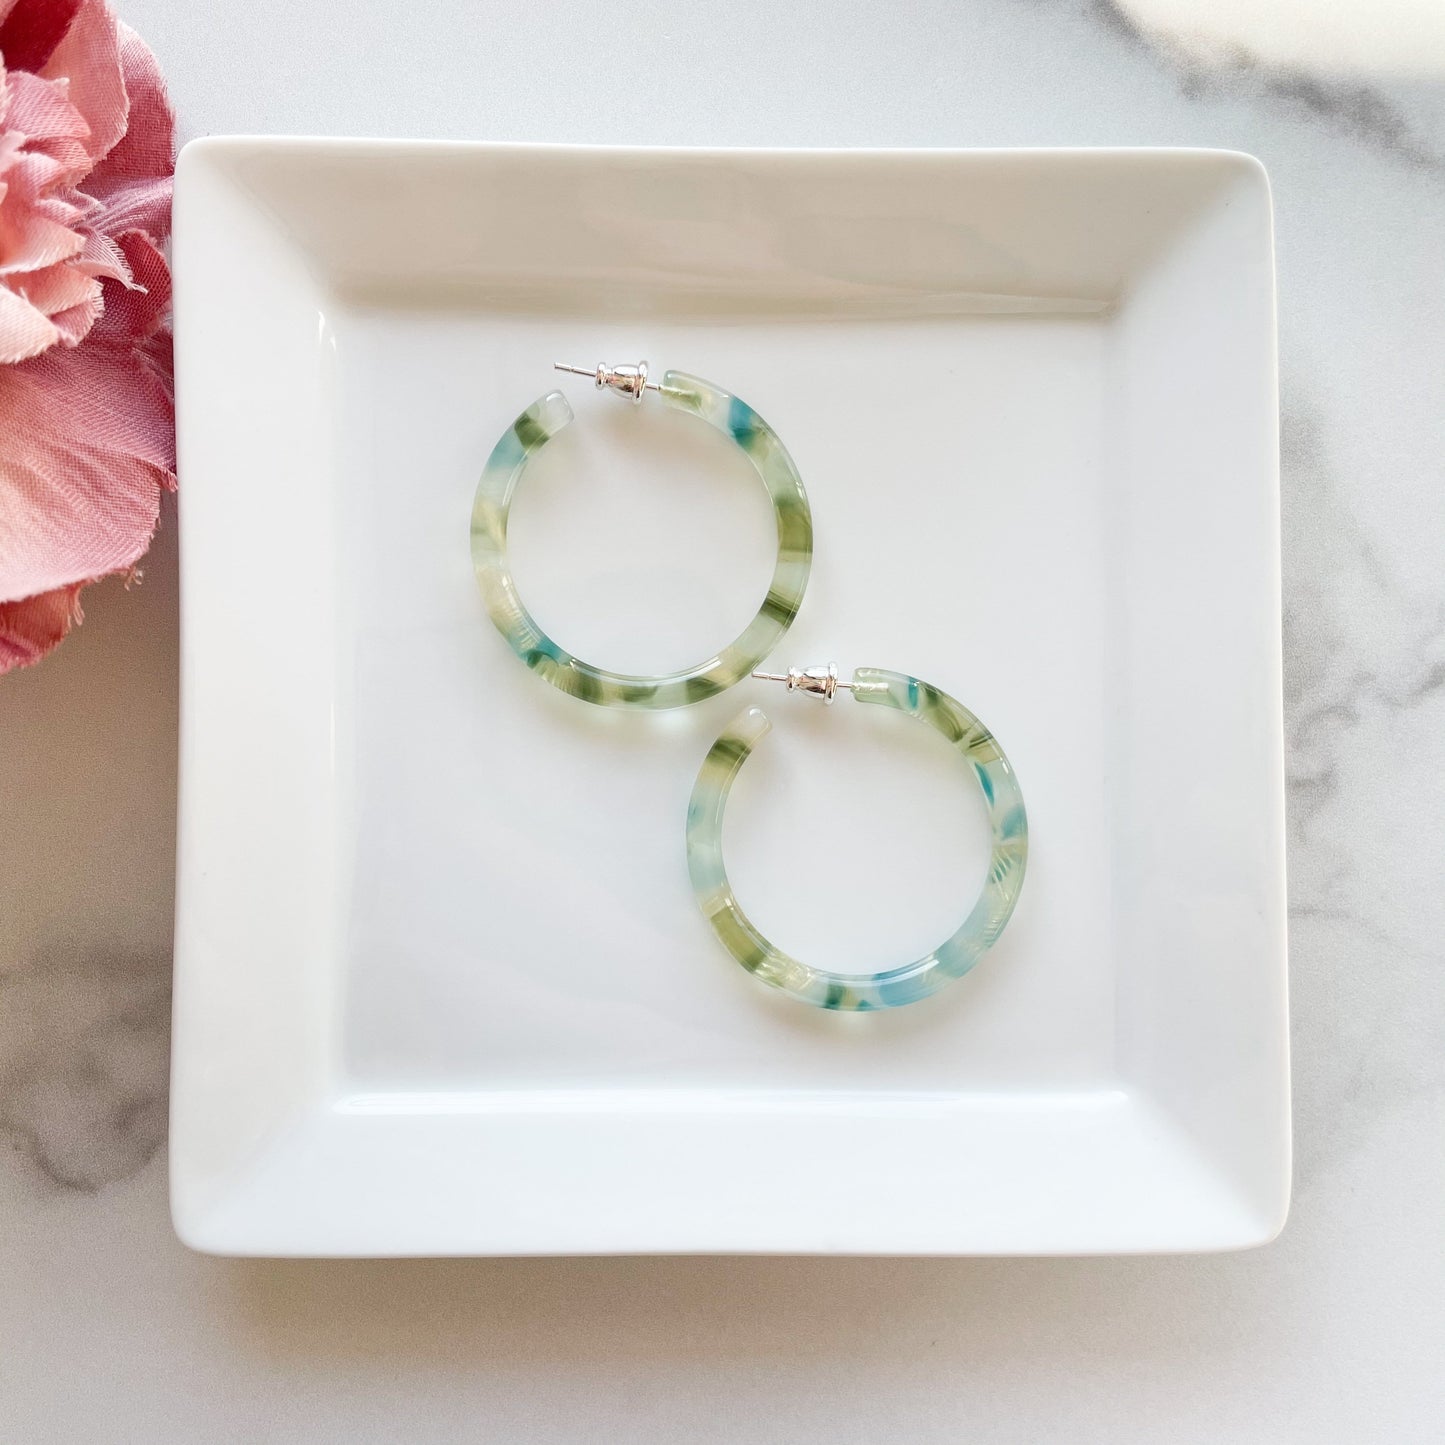 40mm Thin Round Hoops in Dew Drop | Blue Green Gold Shell Hoop Earrings 925 Sterling Silver Posts